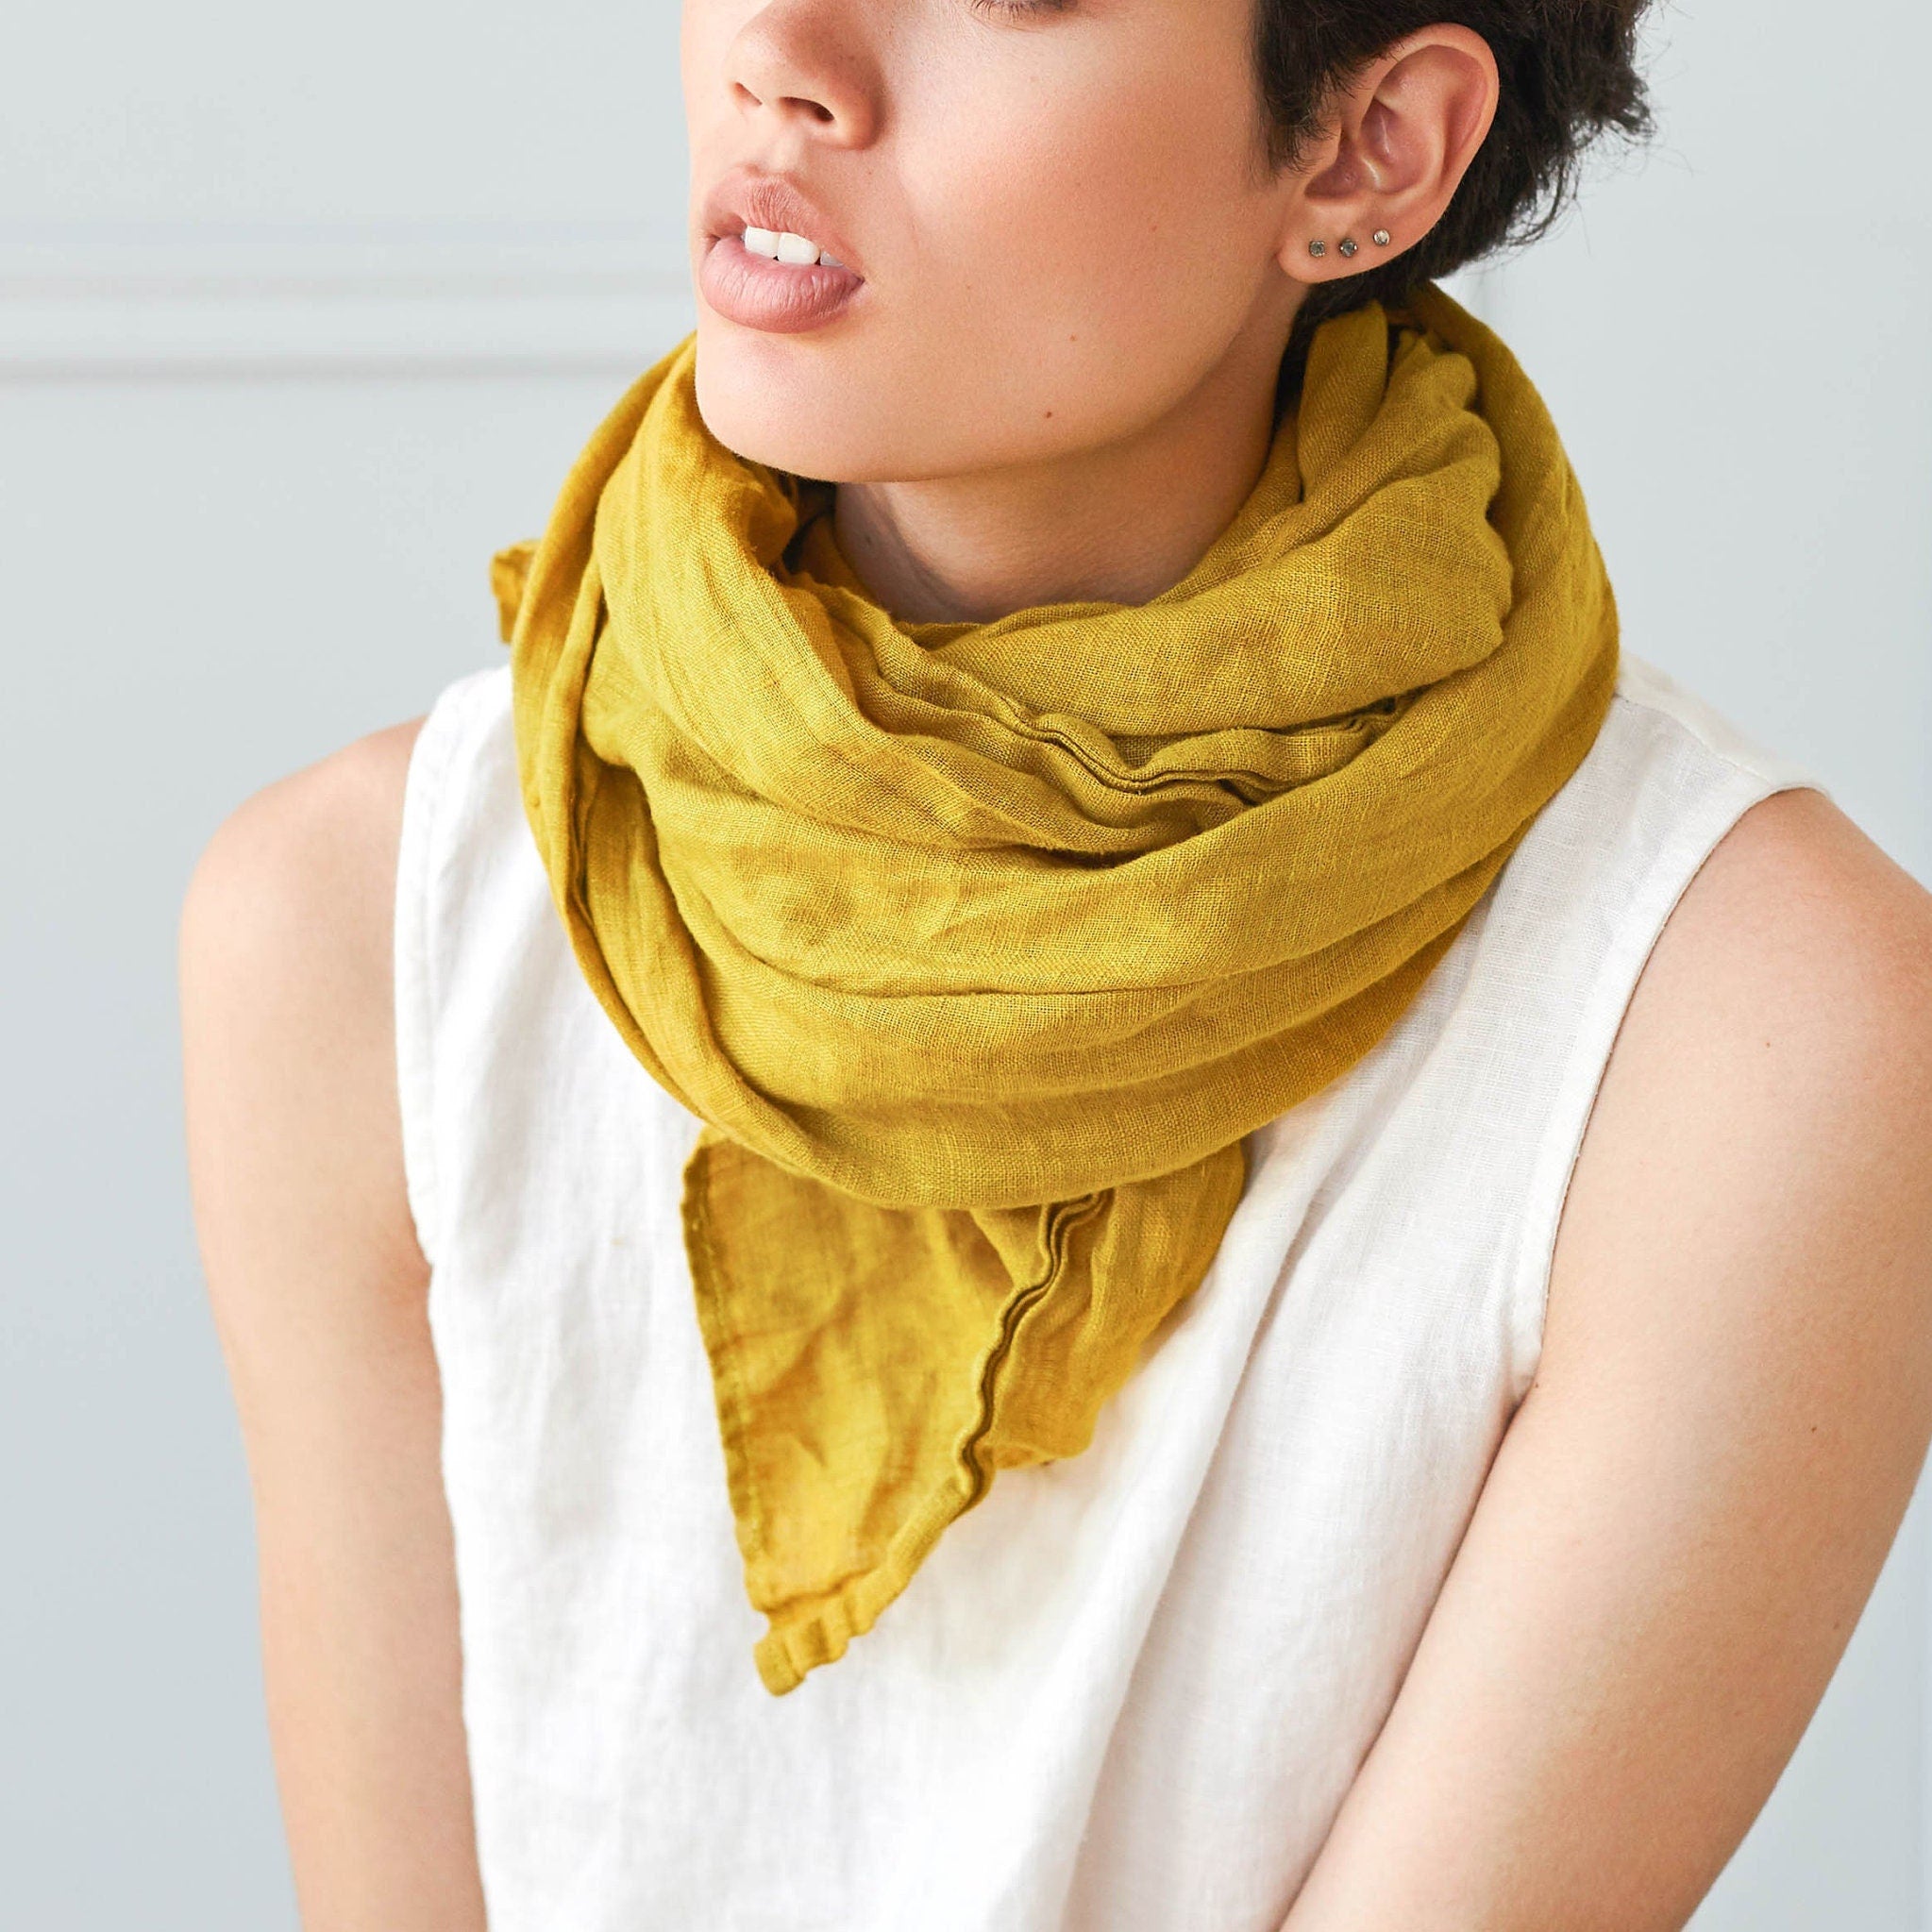 Washed linen scarf / Softened linen scarves in 9 colors / READY TO SHIP